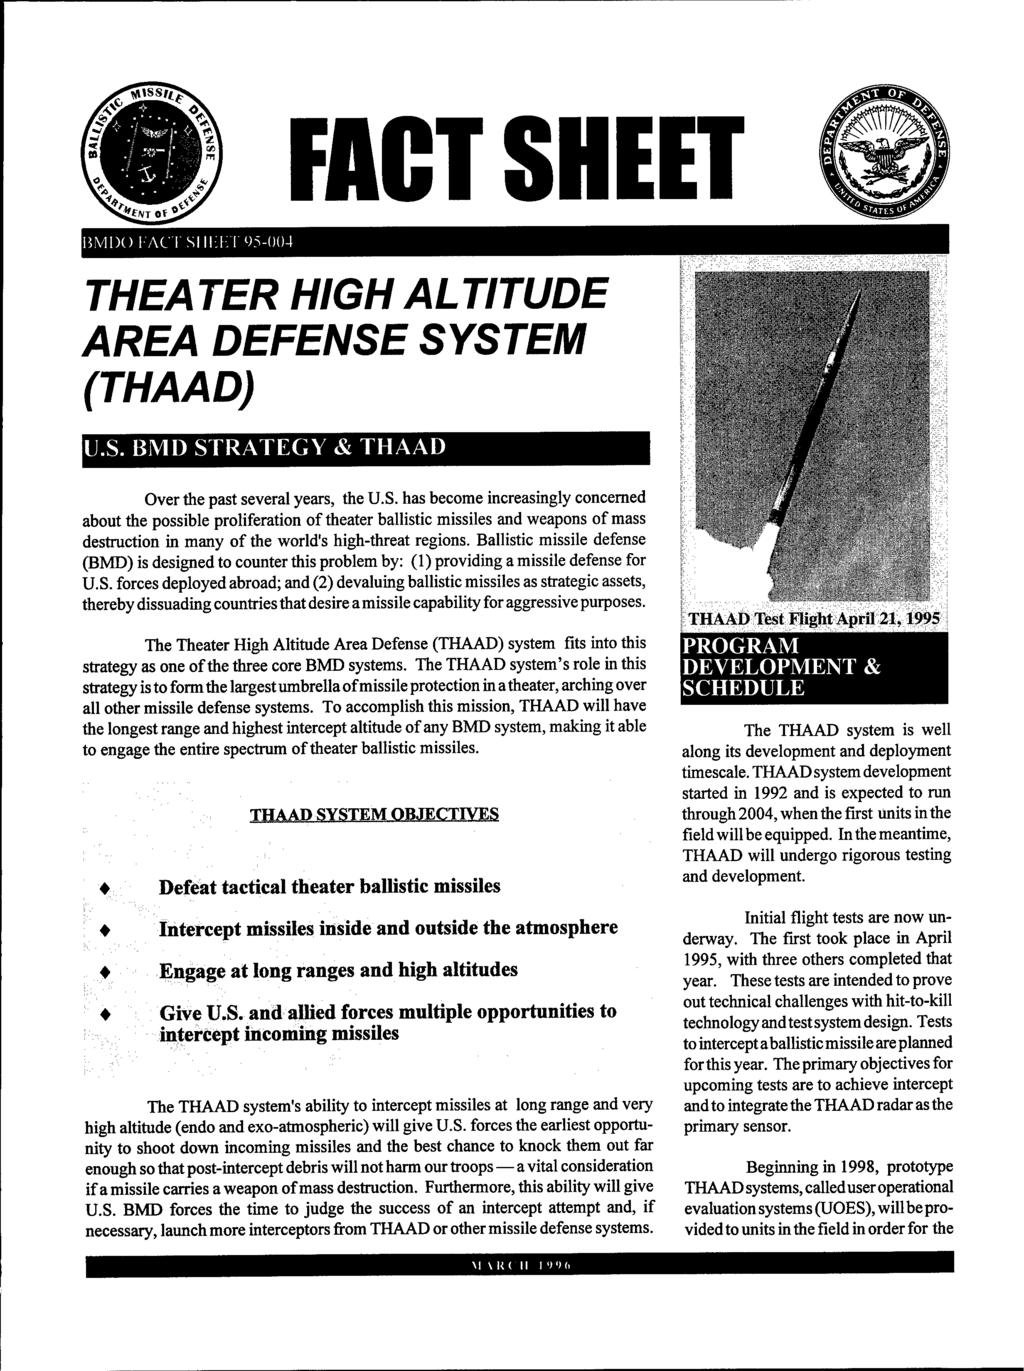 FACT SHEET THEATER HIGH ALTITUDE AREA DEFENSE SYSTEM (THAAD) U.S. BMD STRATEGY & THAAD Over the past several years, the U.S. has become increasingly concerned about the possible proliferation of theater ballistic missiles and weapons of mass destruction in many of the world's high-threat regions.